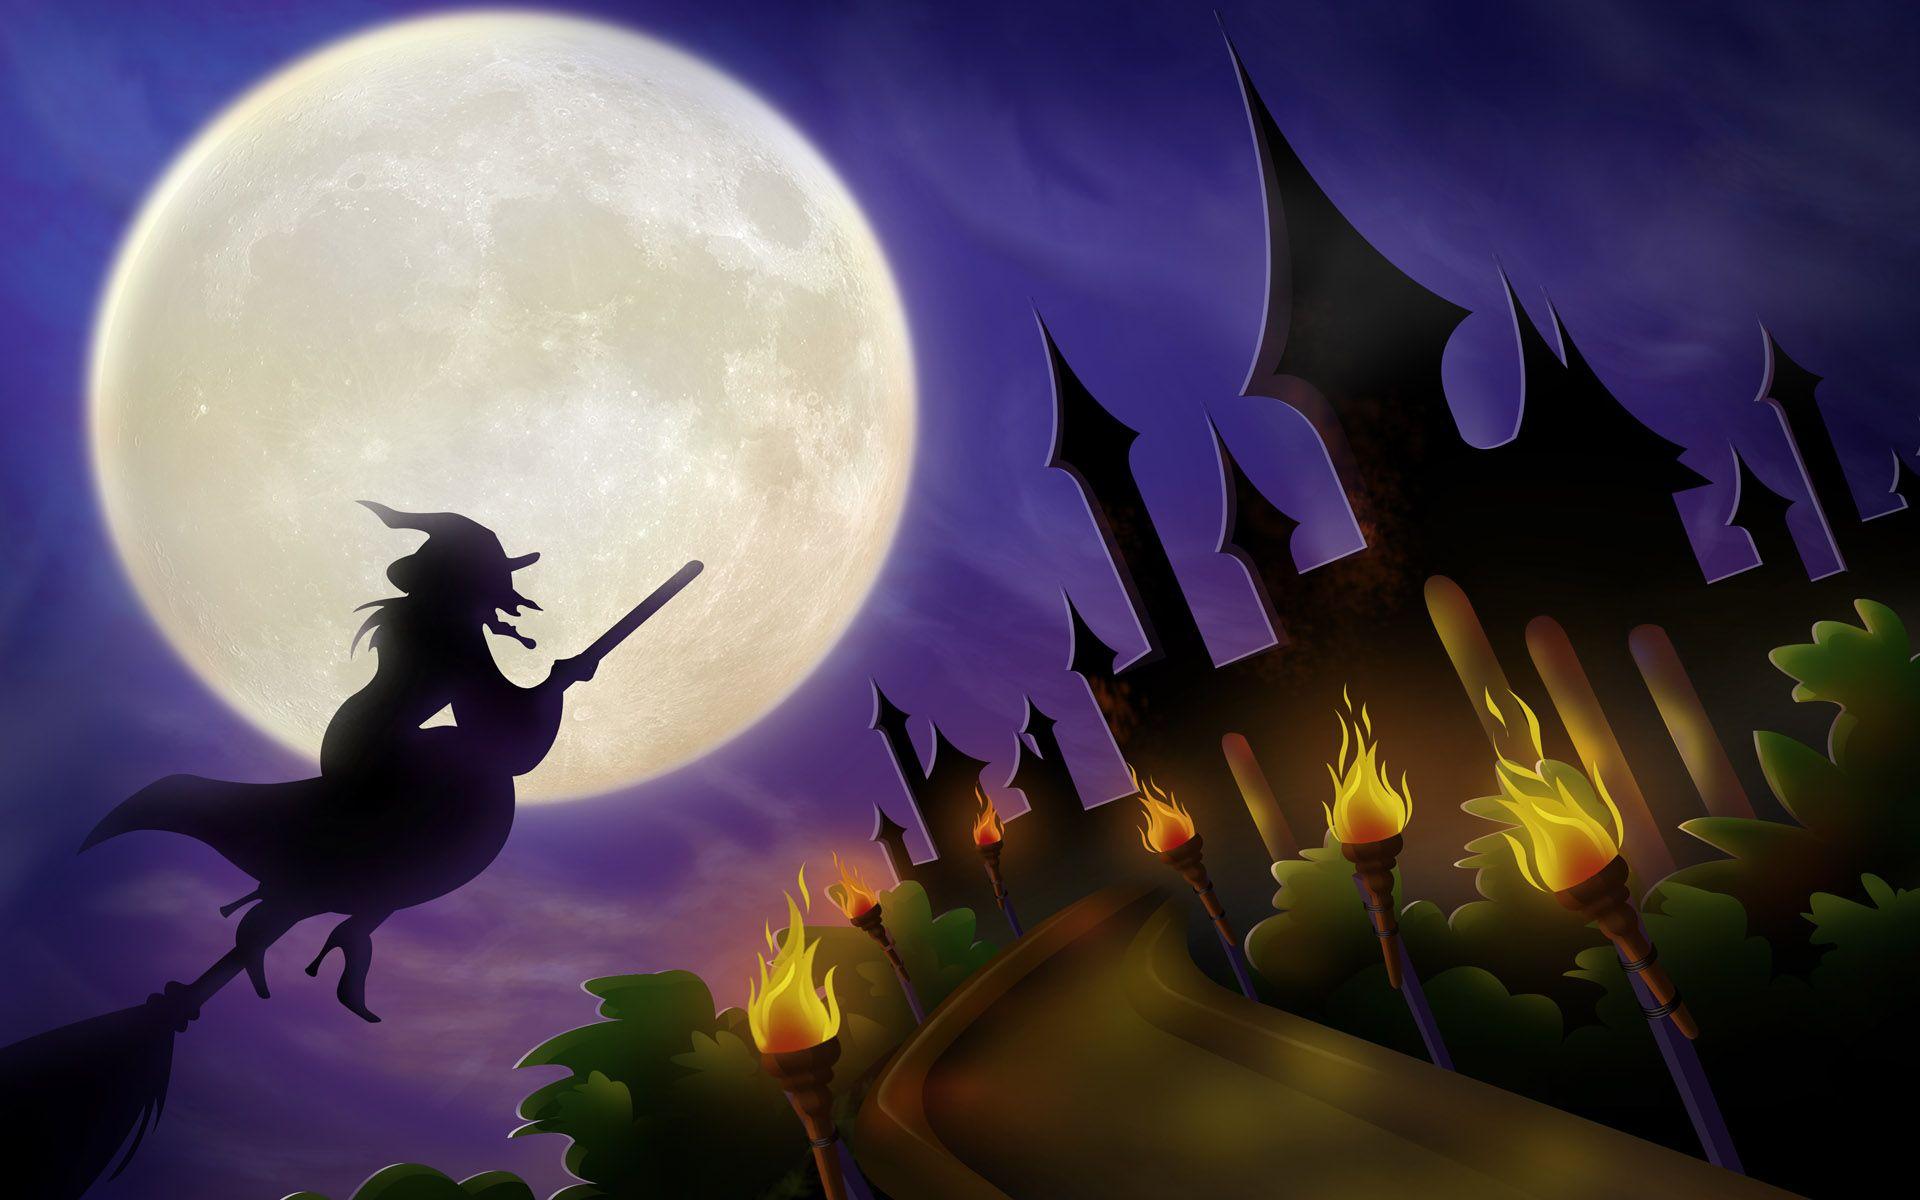 Christmas, castle, wizard, flying, halloween, background, holidays